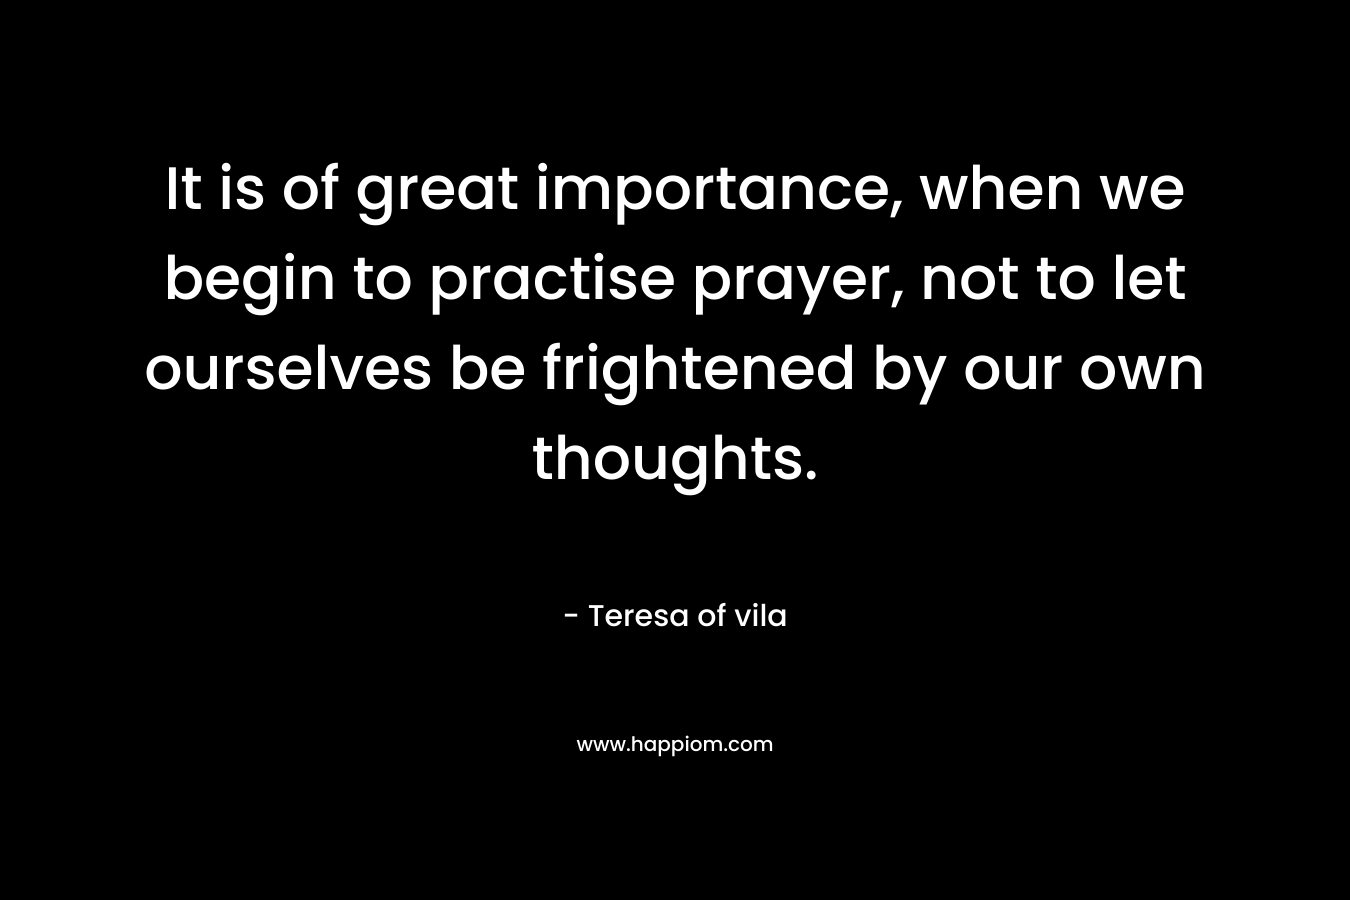 It is of great importance, when we begin to practise prayer, not to let ourselves be frightened by our own thoughts.